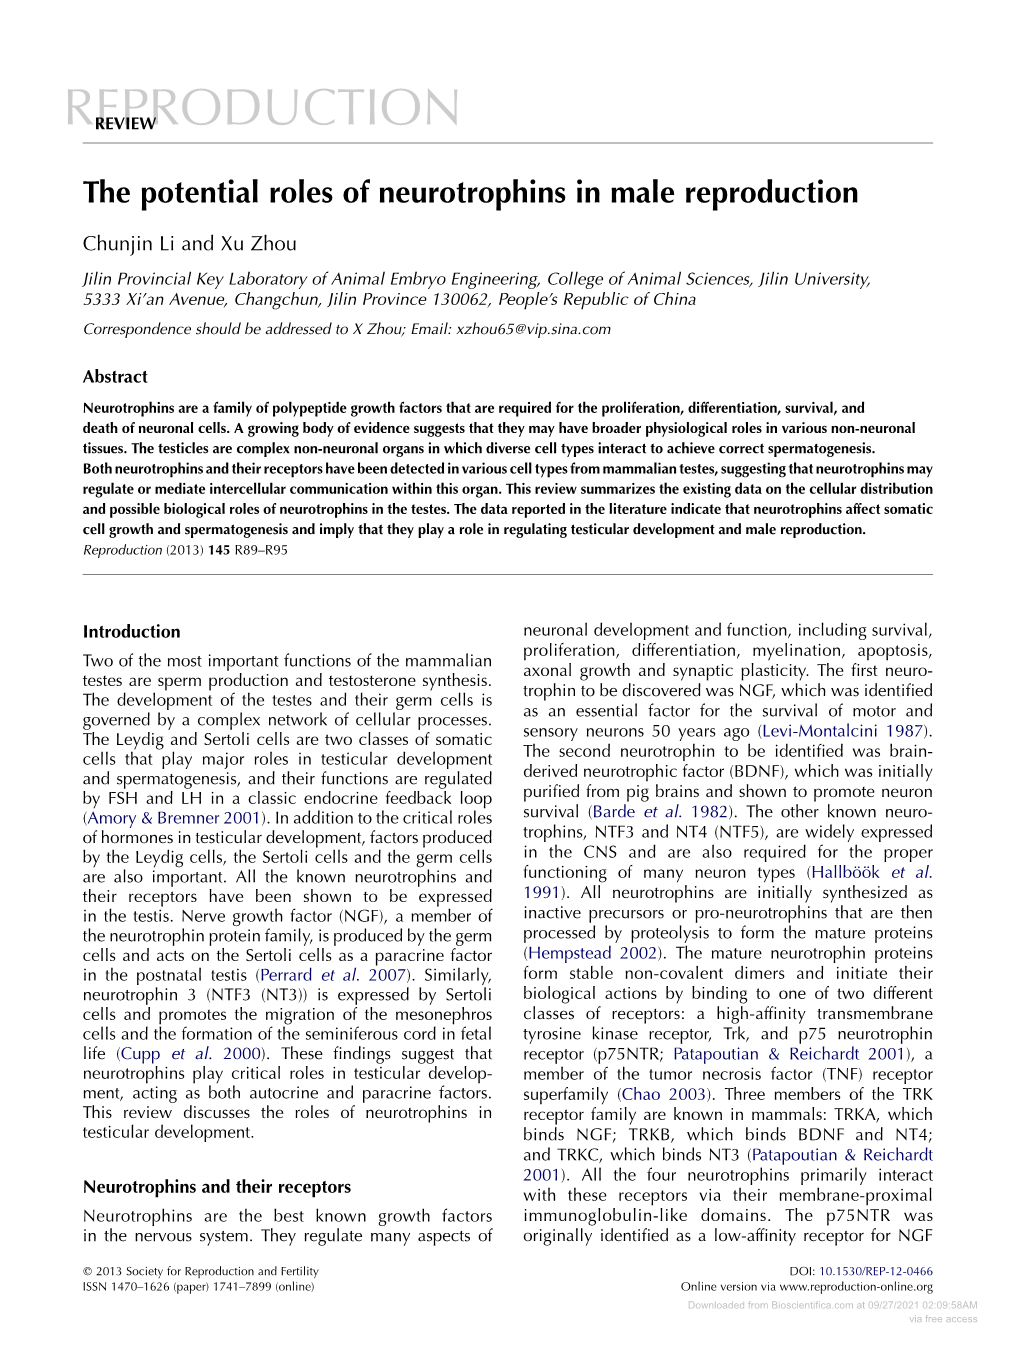 The Potential Roles of Neurotrophins in Male Reproduction